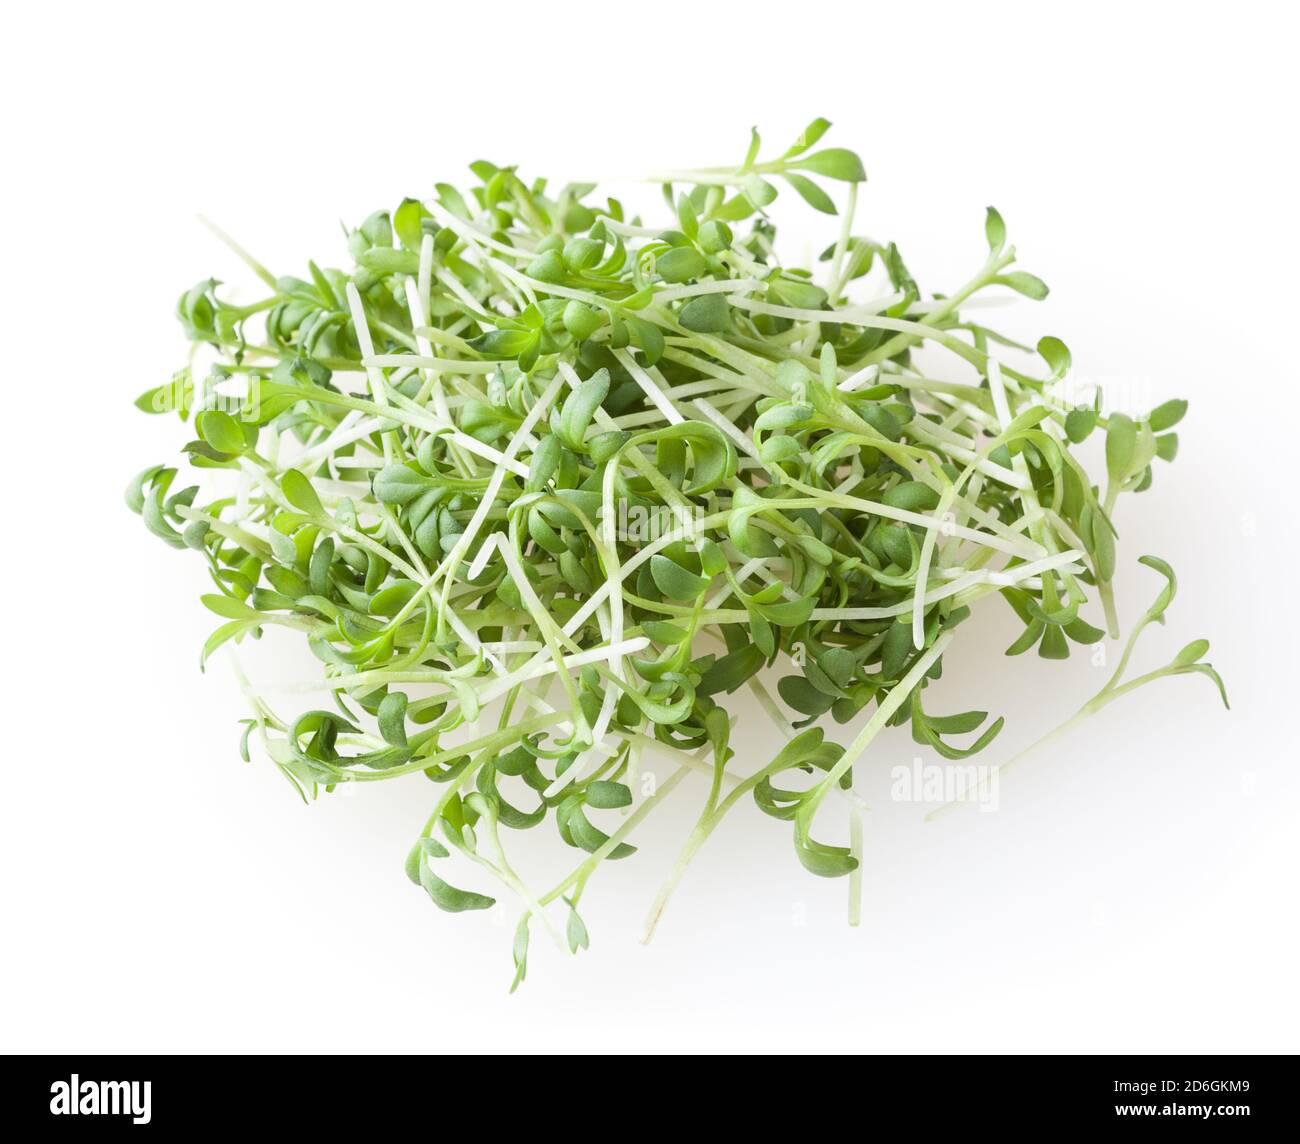 Heap of micro greens garden cress sprouts l isolated on white background Stock Photo